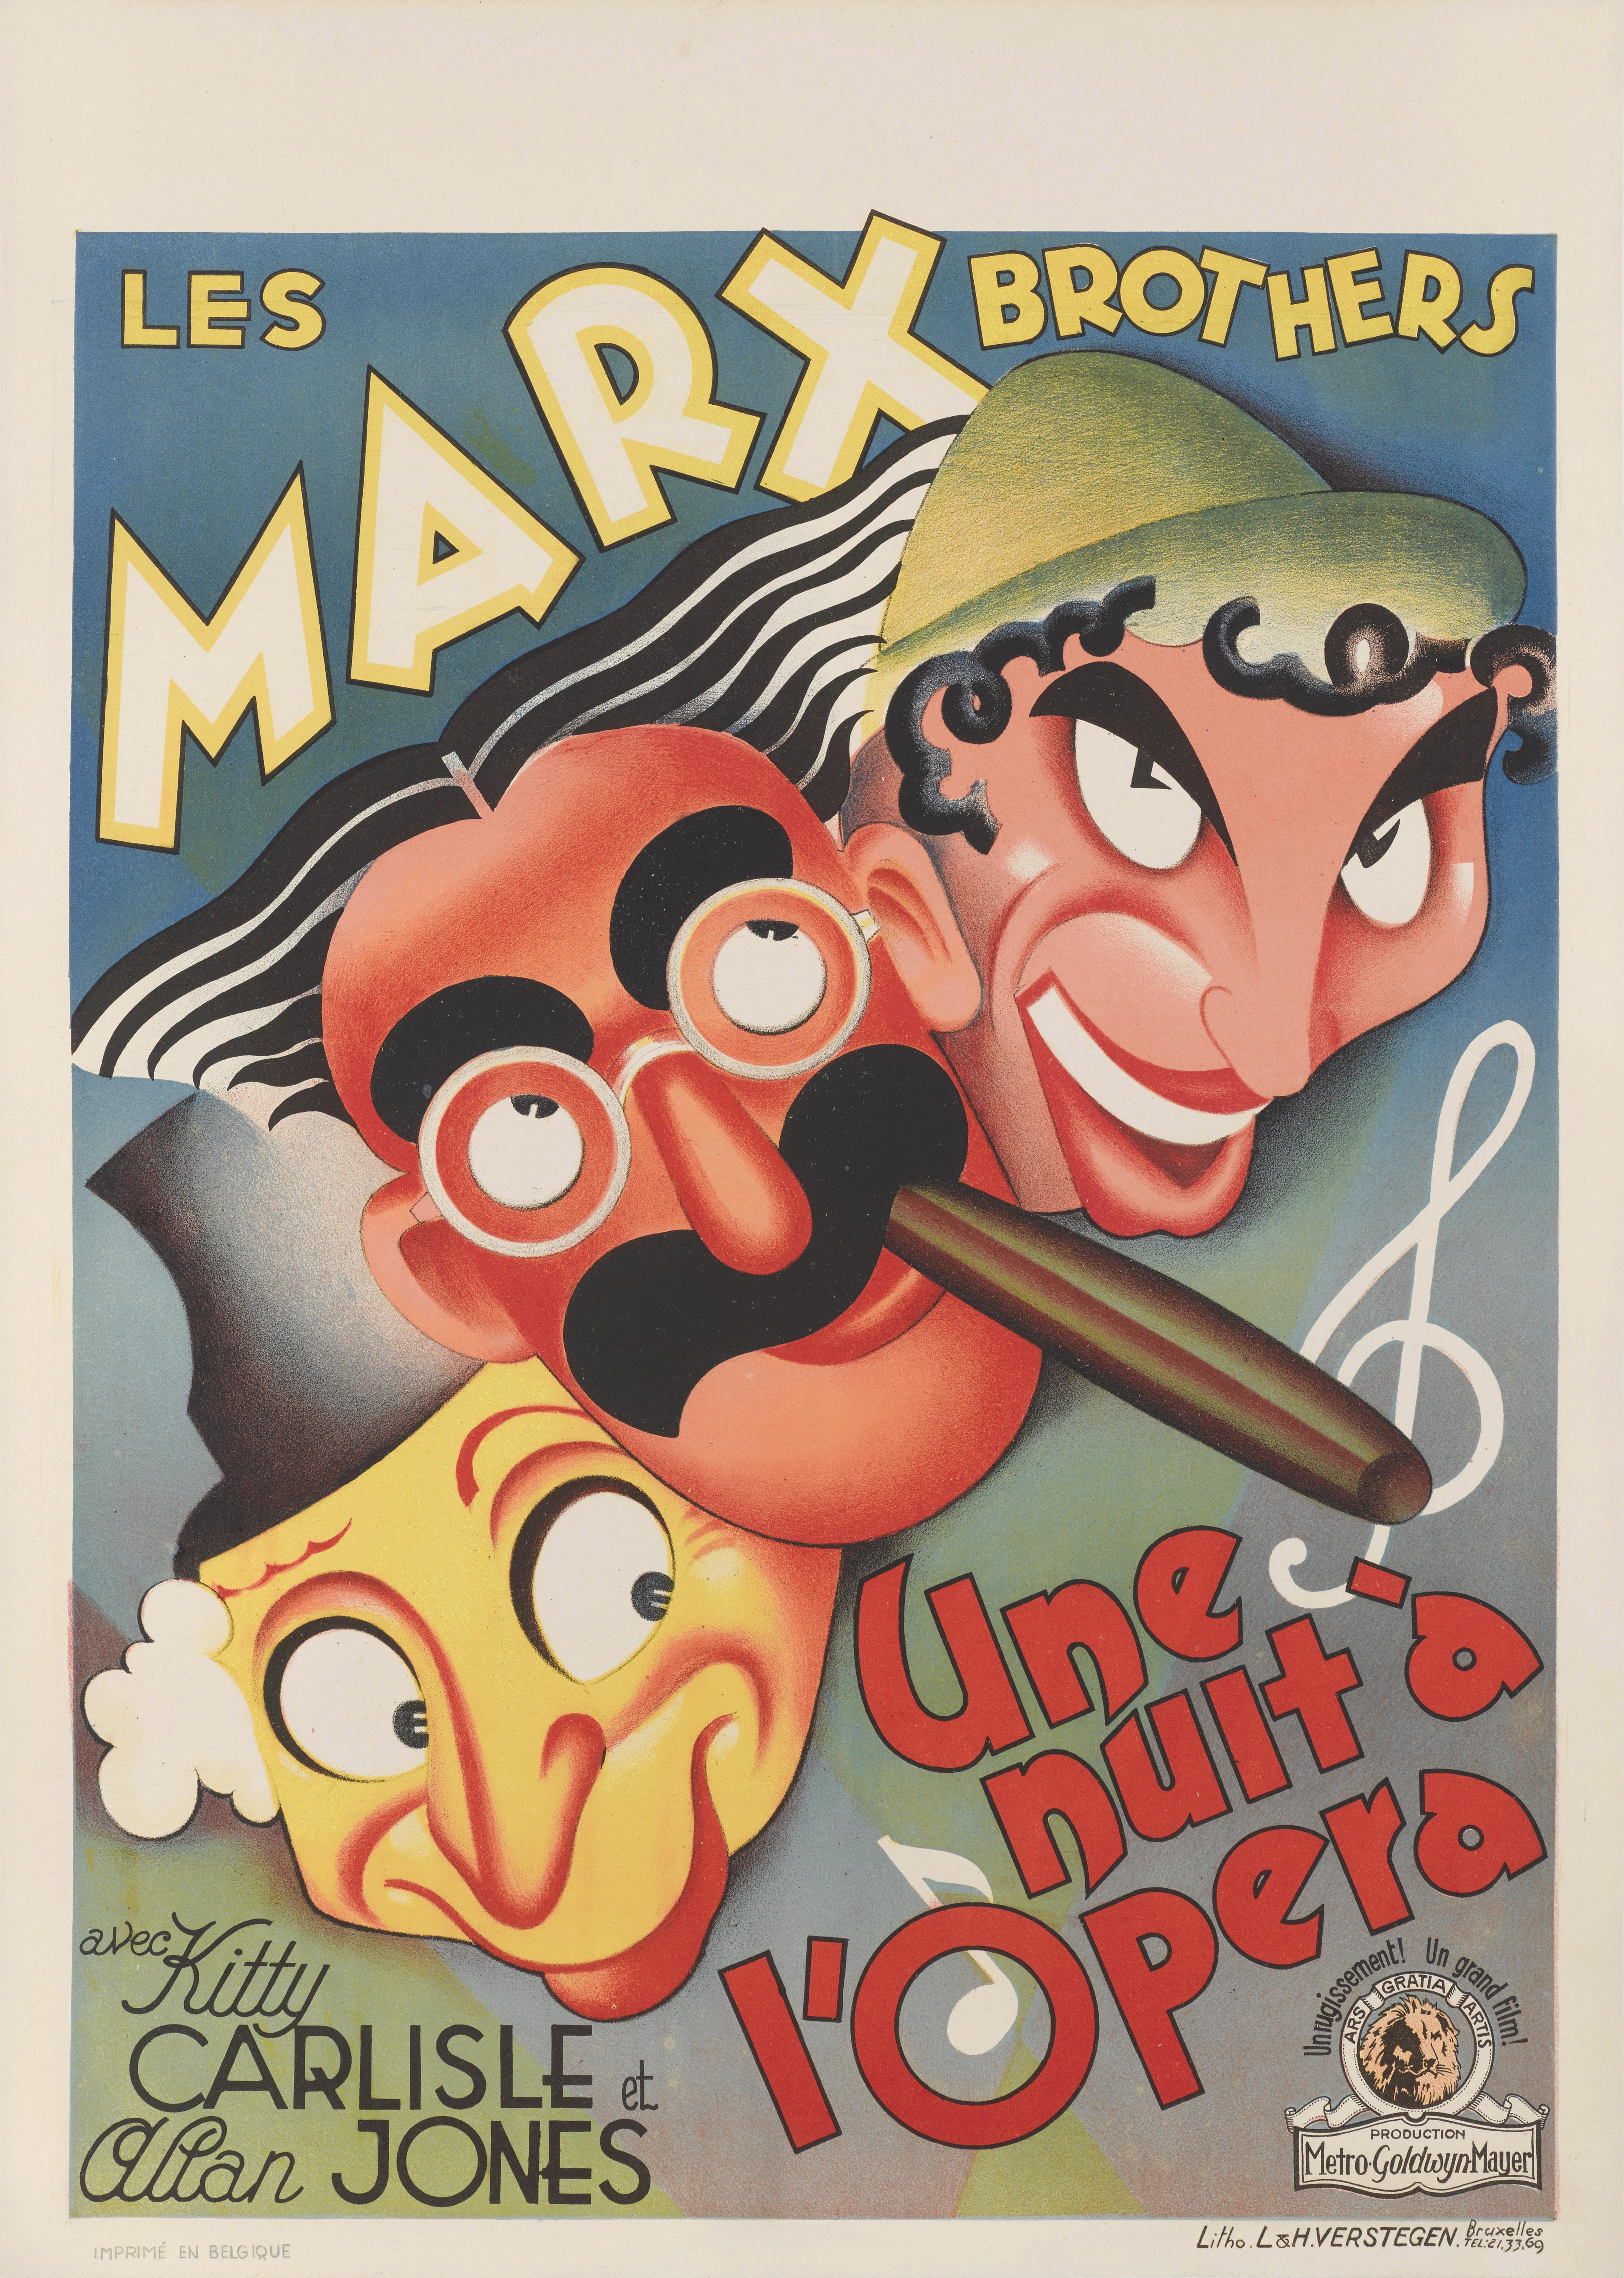 Original (1935) film posters. Belgian posters were printed on this larger paper stock up to World War II, during the war and afterwards posters were only printed in a smaller size. This is most definitely one of the most visually stunning Marx